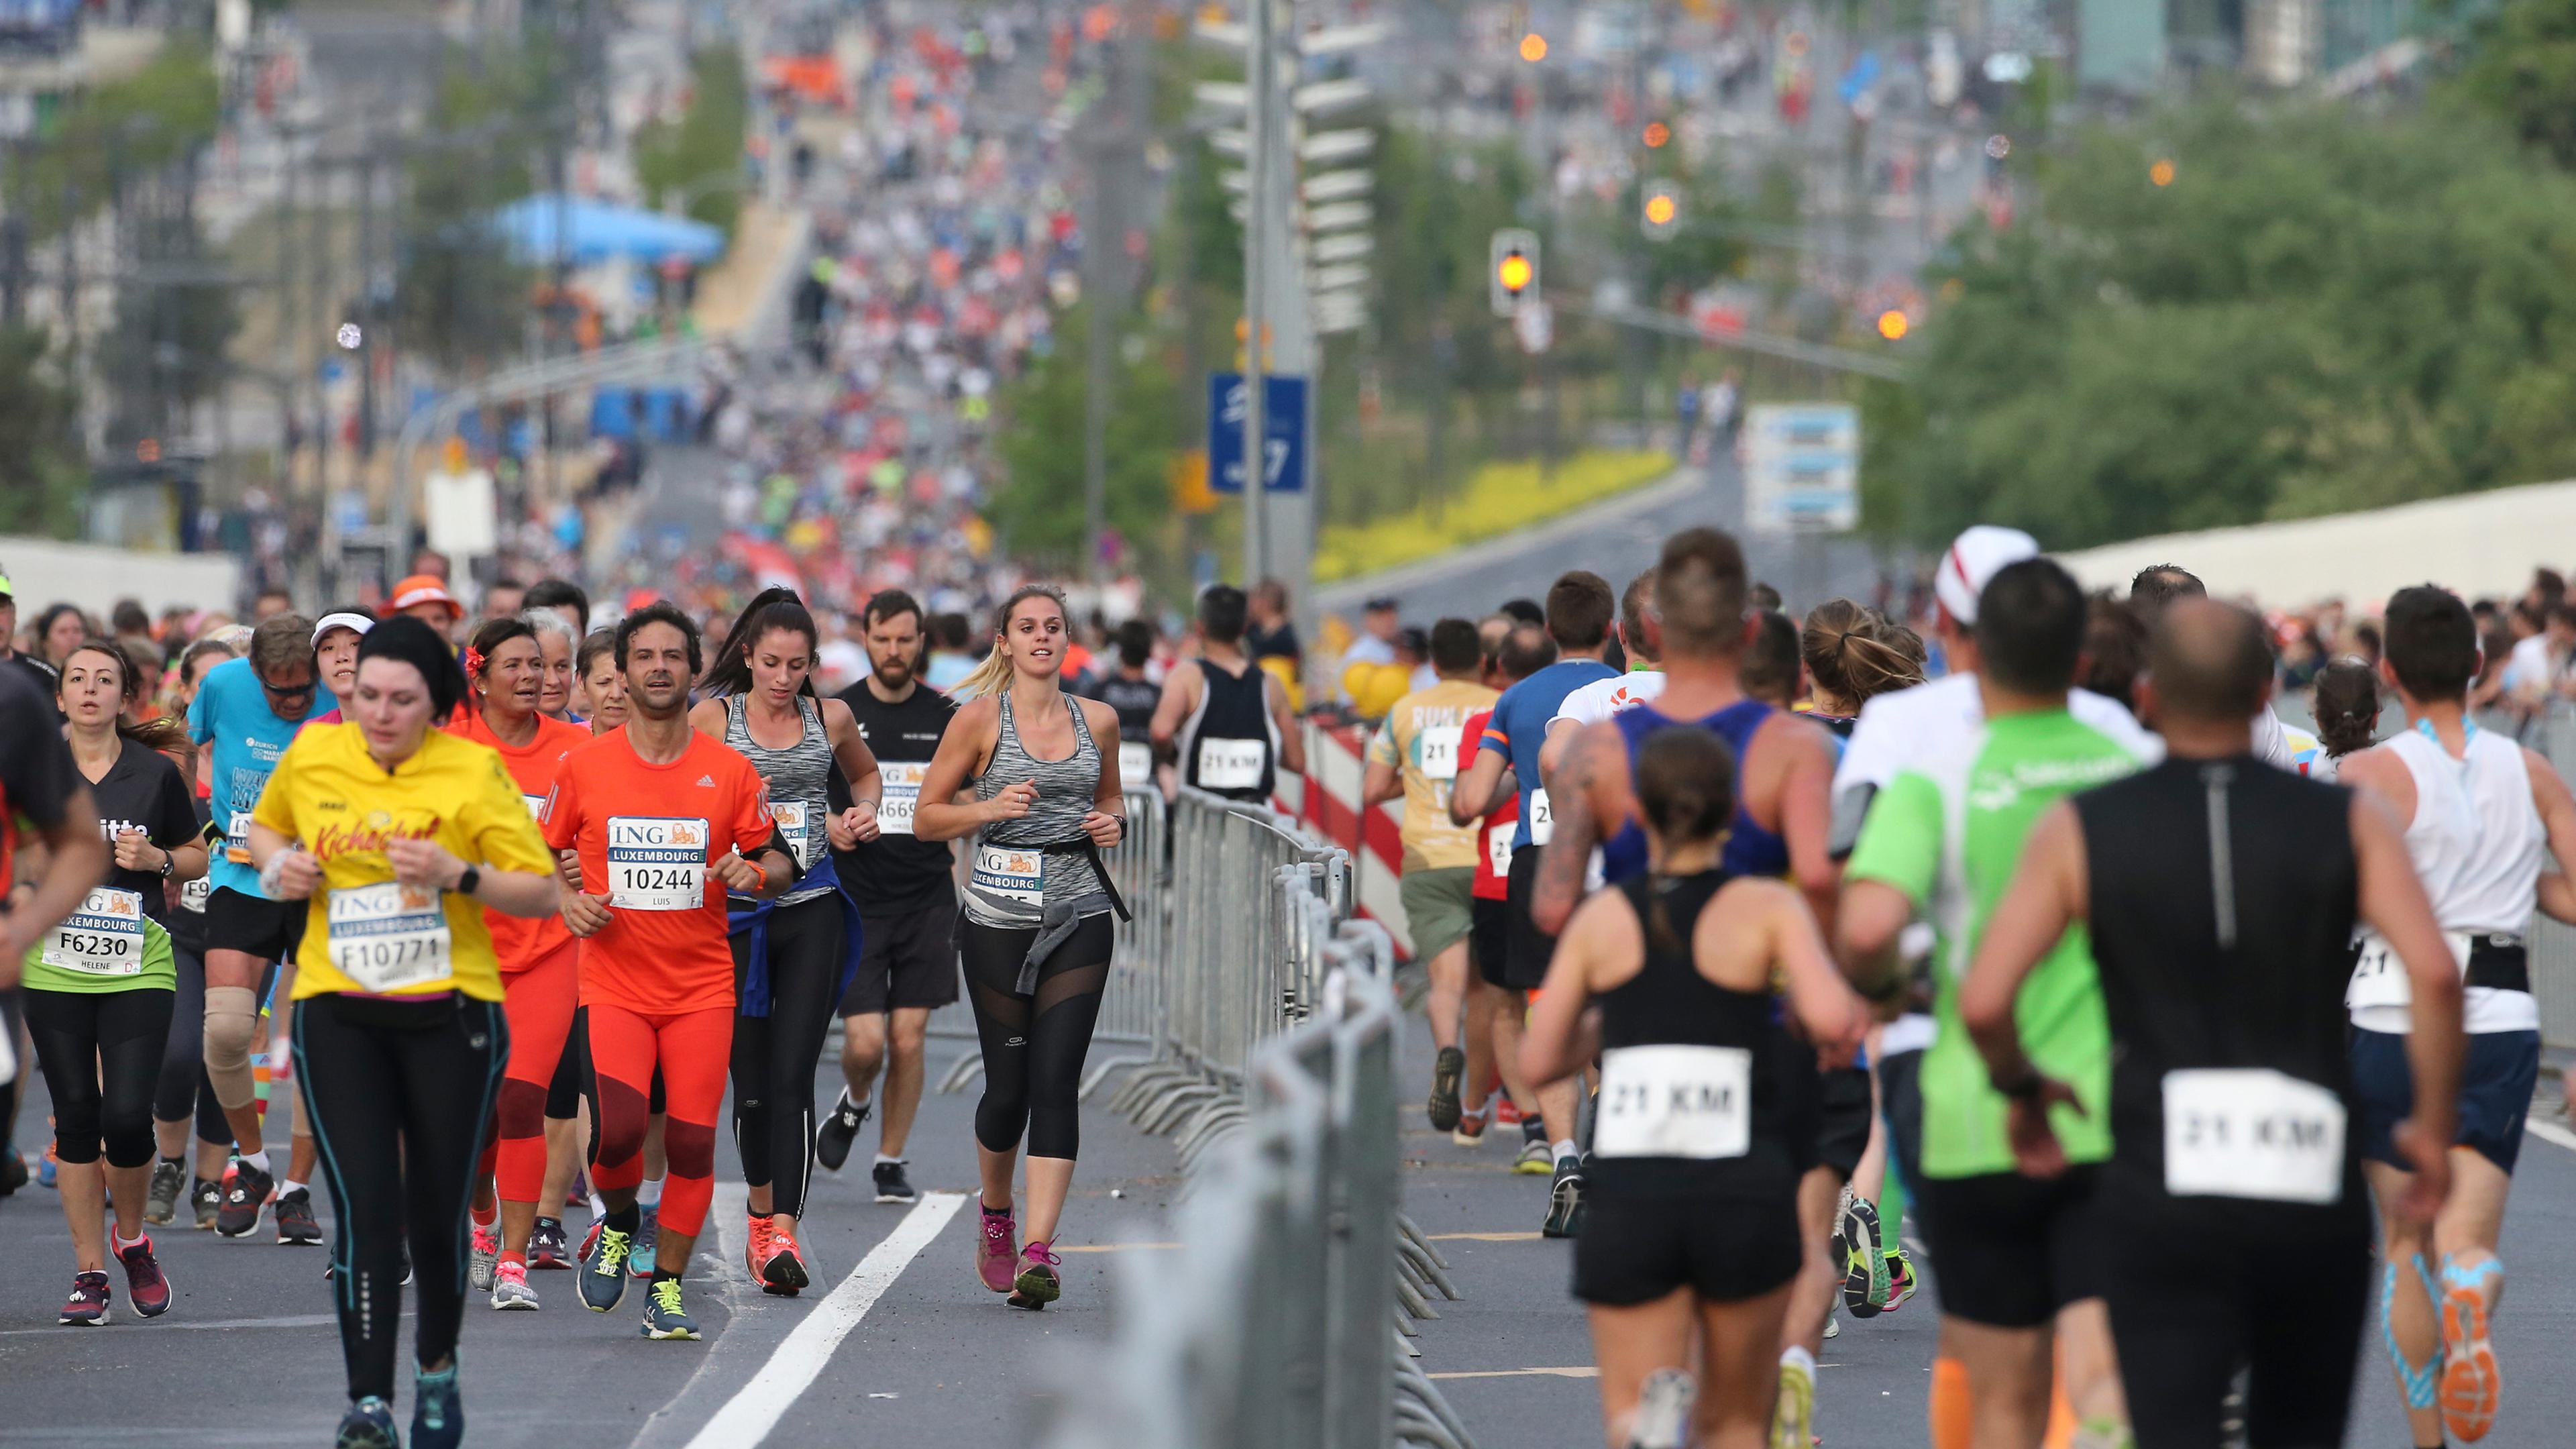 Thousands of runners will participate in the country’s most popular running event on Saturday